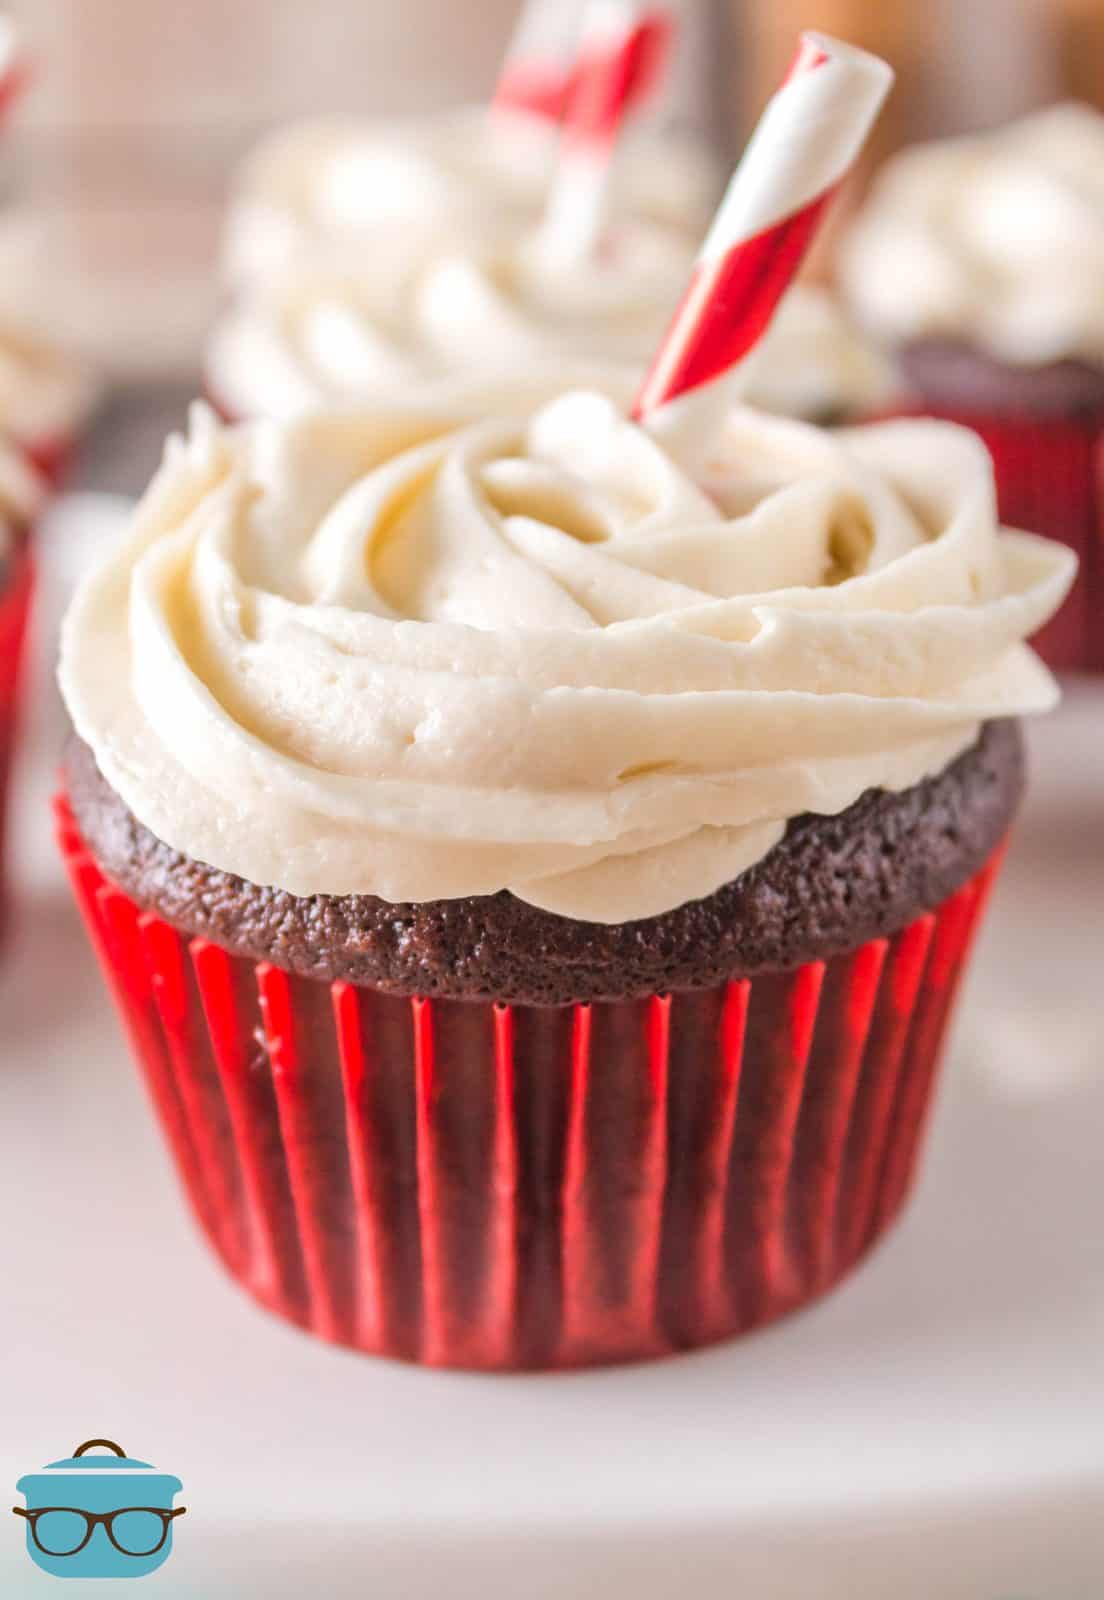 One Coca Cola Cupcake with swirled red and white straw inserted into it.